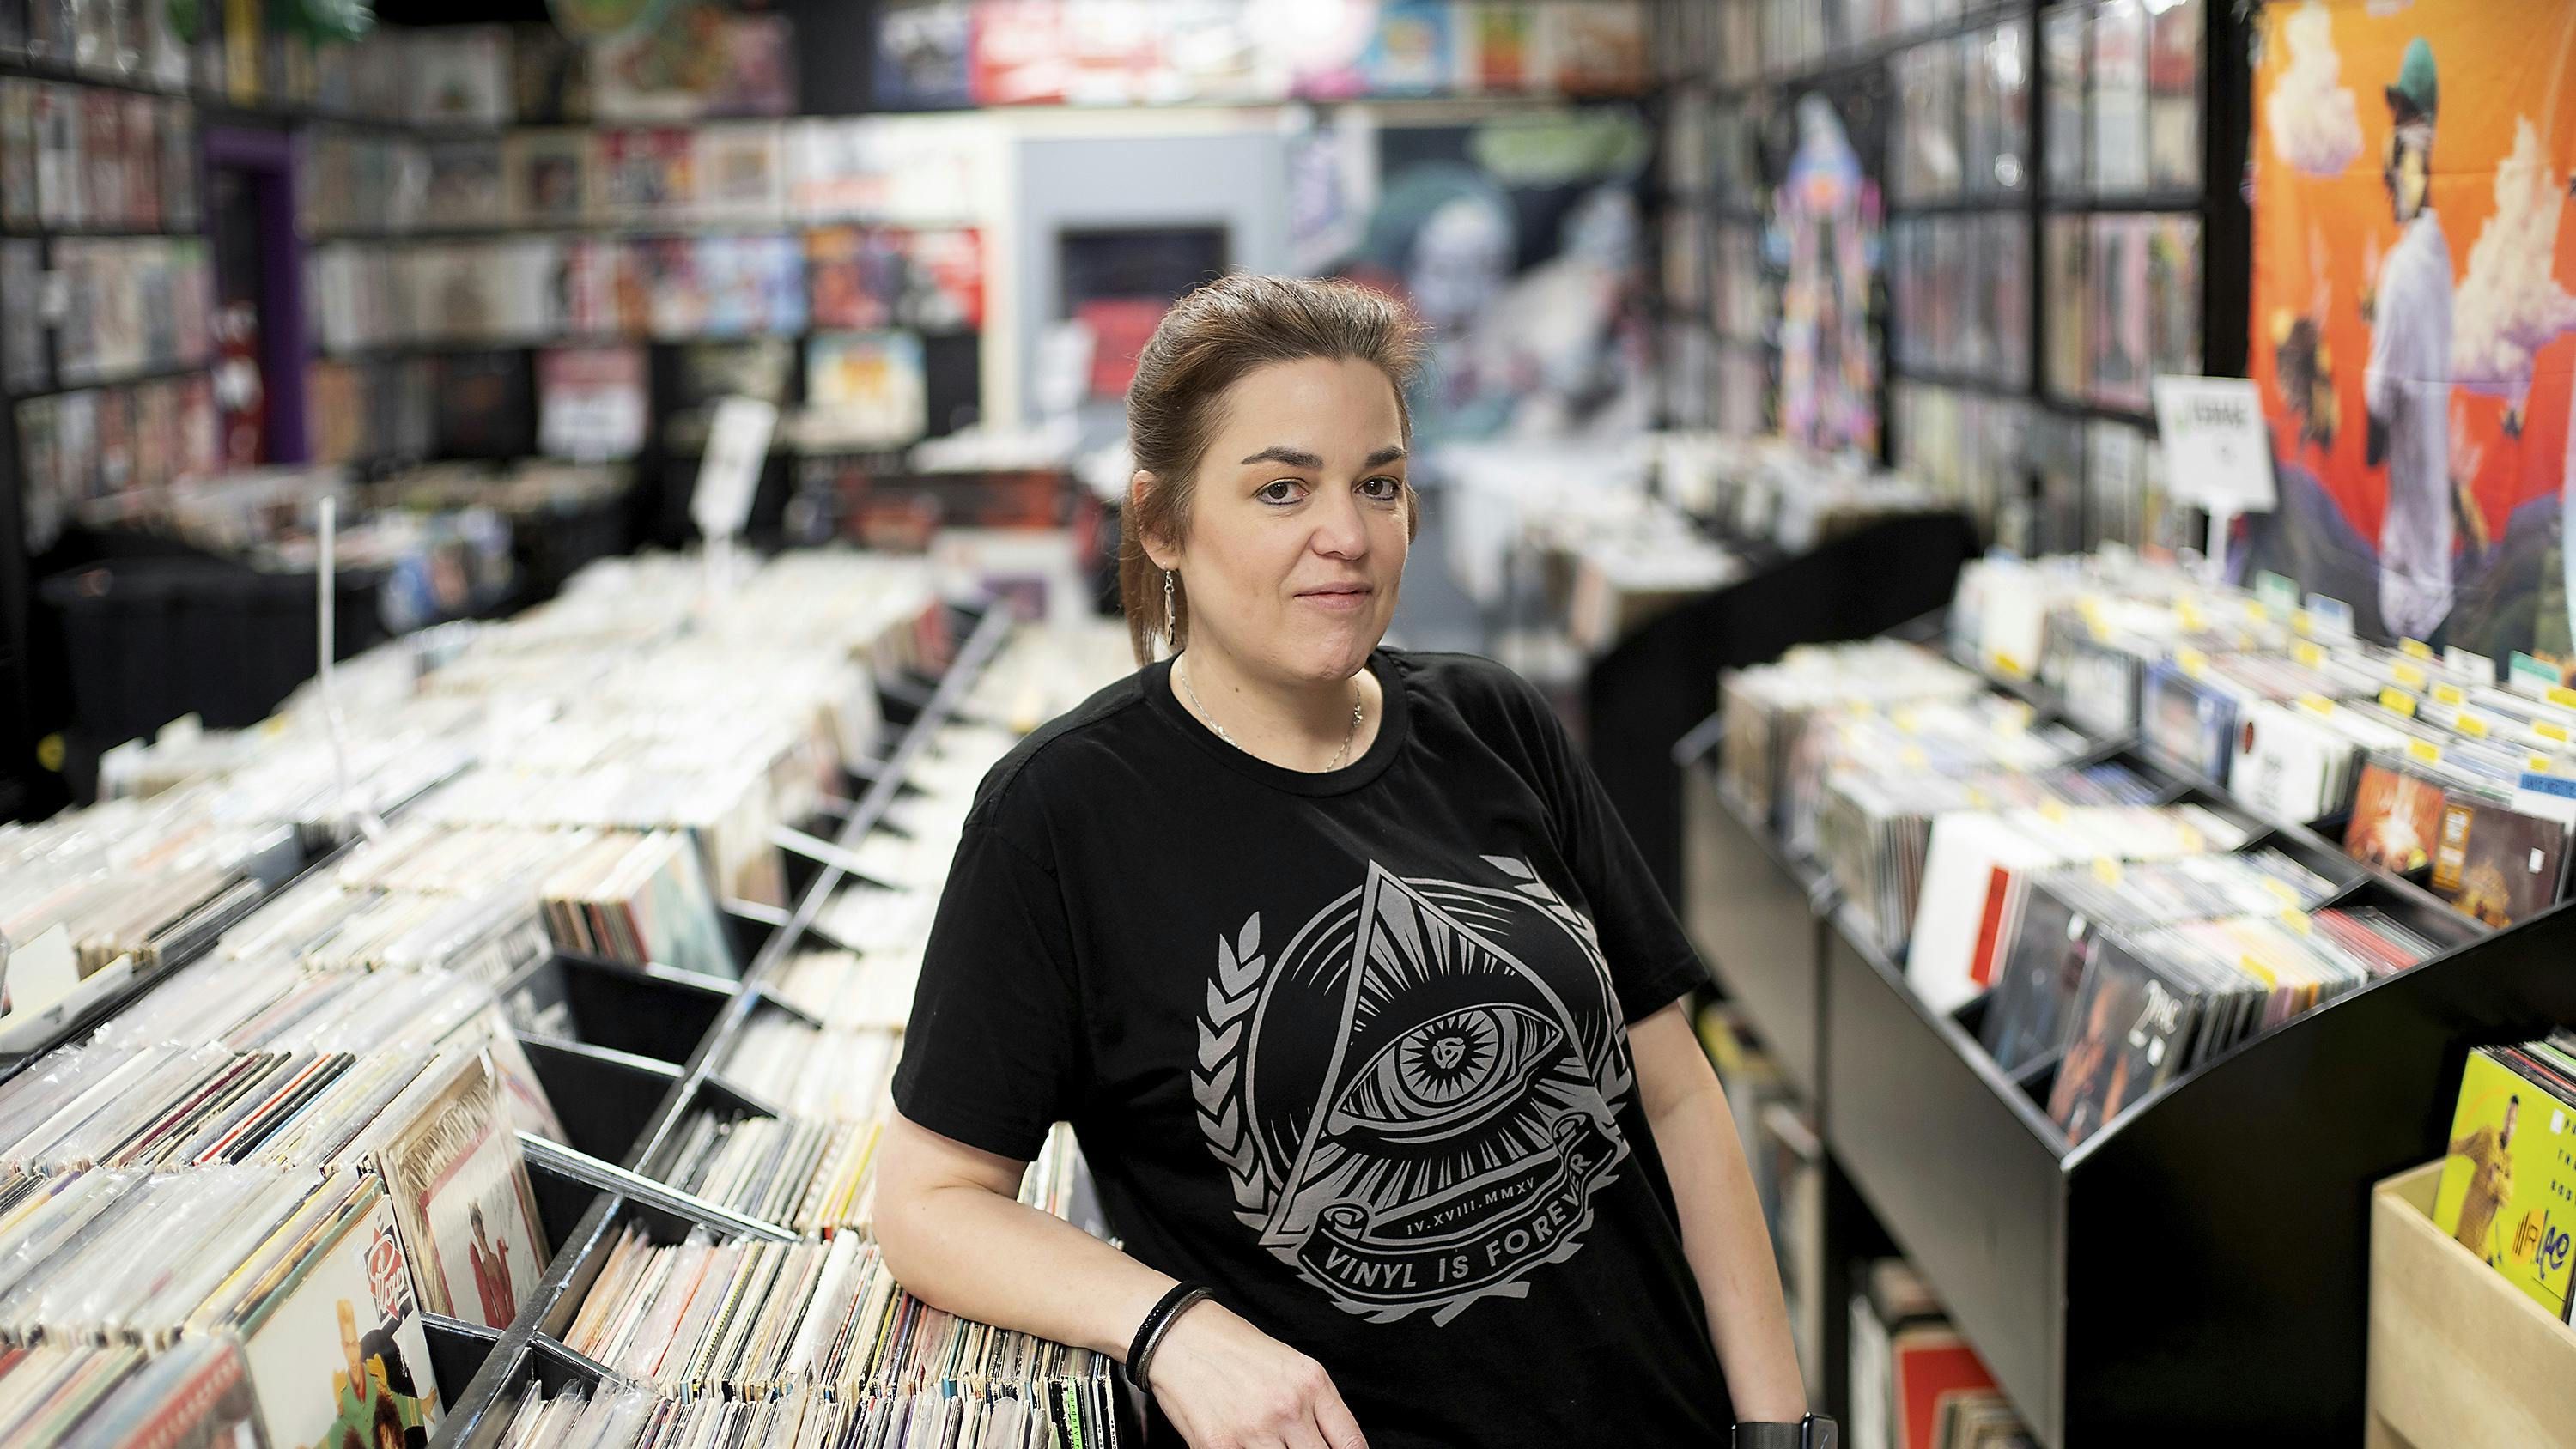 Nicole Mays, owner of Vinyl Heaven, in her store on Tuesday, April 11, 2023, in Dickinson, Texas. (Elizabeth Conley/Houston Chronicle via AP)